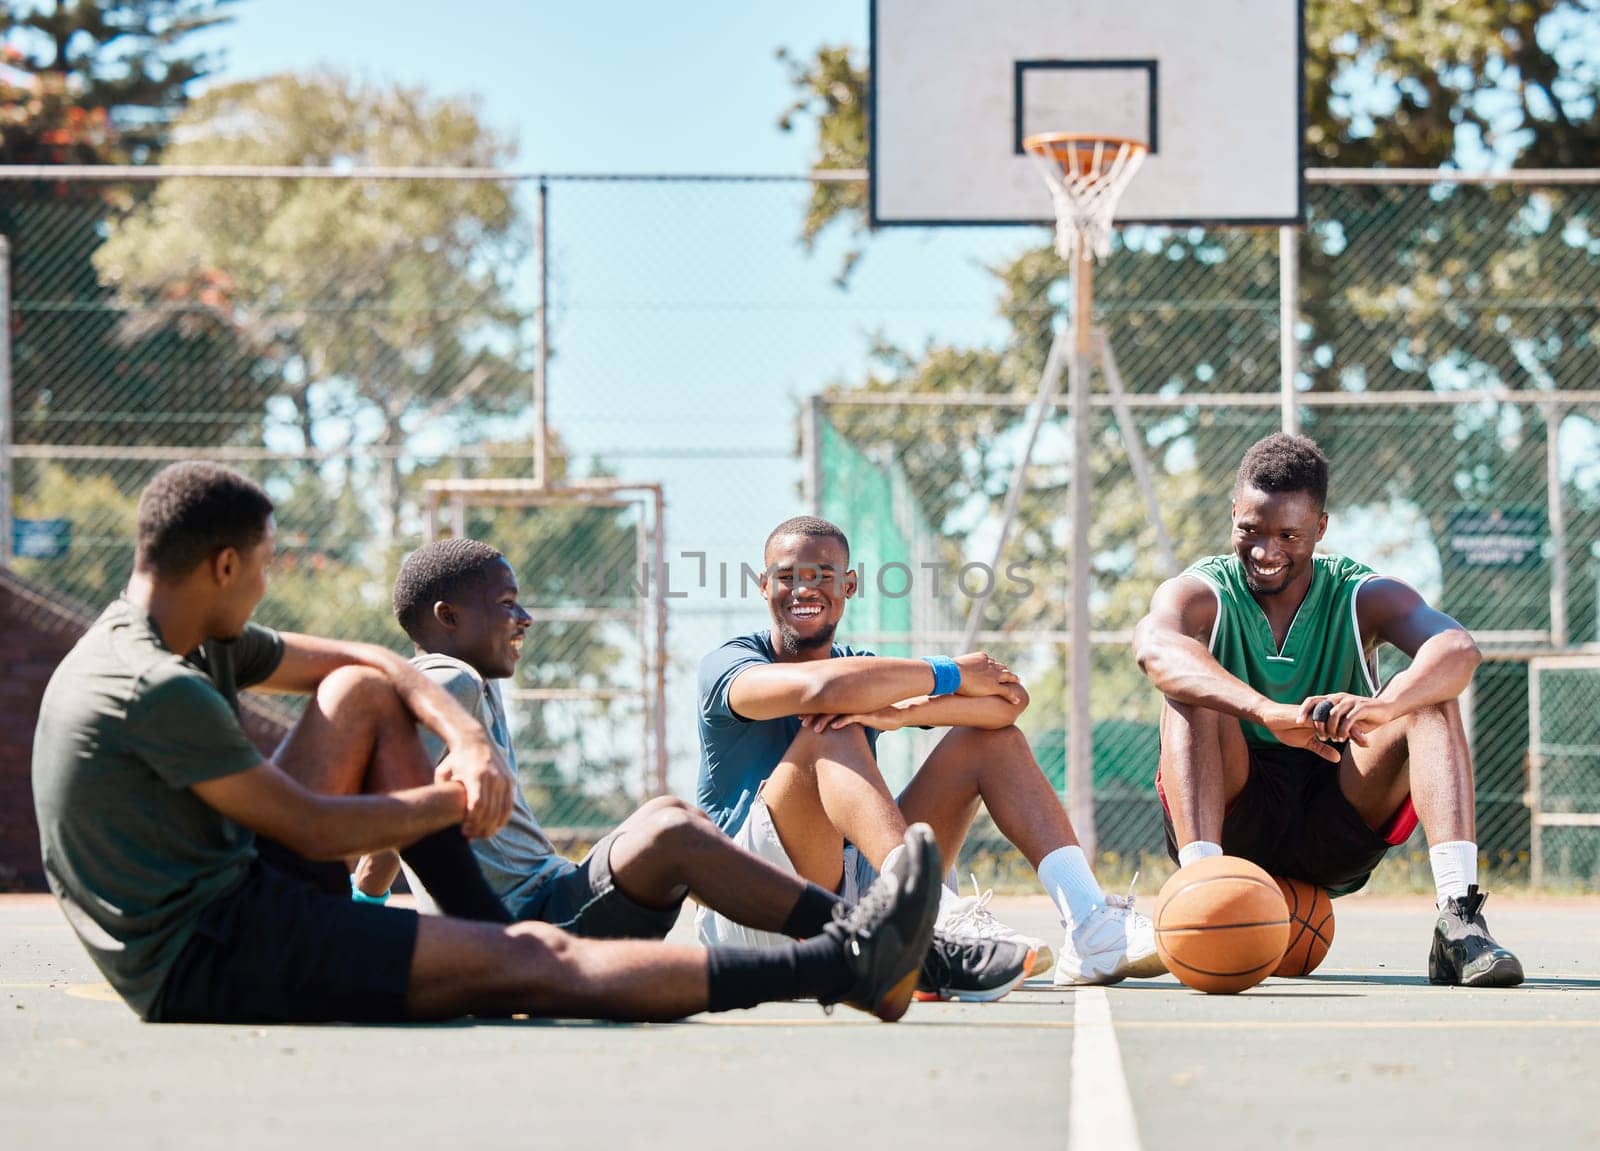 Basketball court, friends and men, break and team sports, social conversation and relax in community playground. Basketball players, rest and black people together after game, team training and match by YuriArcurs